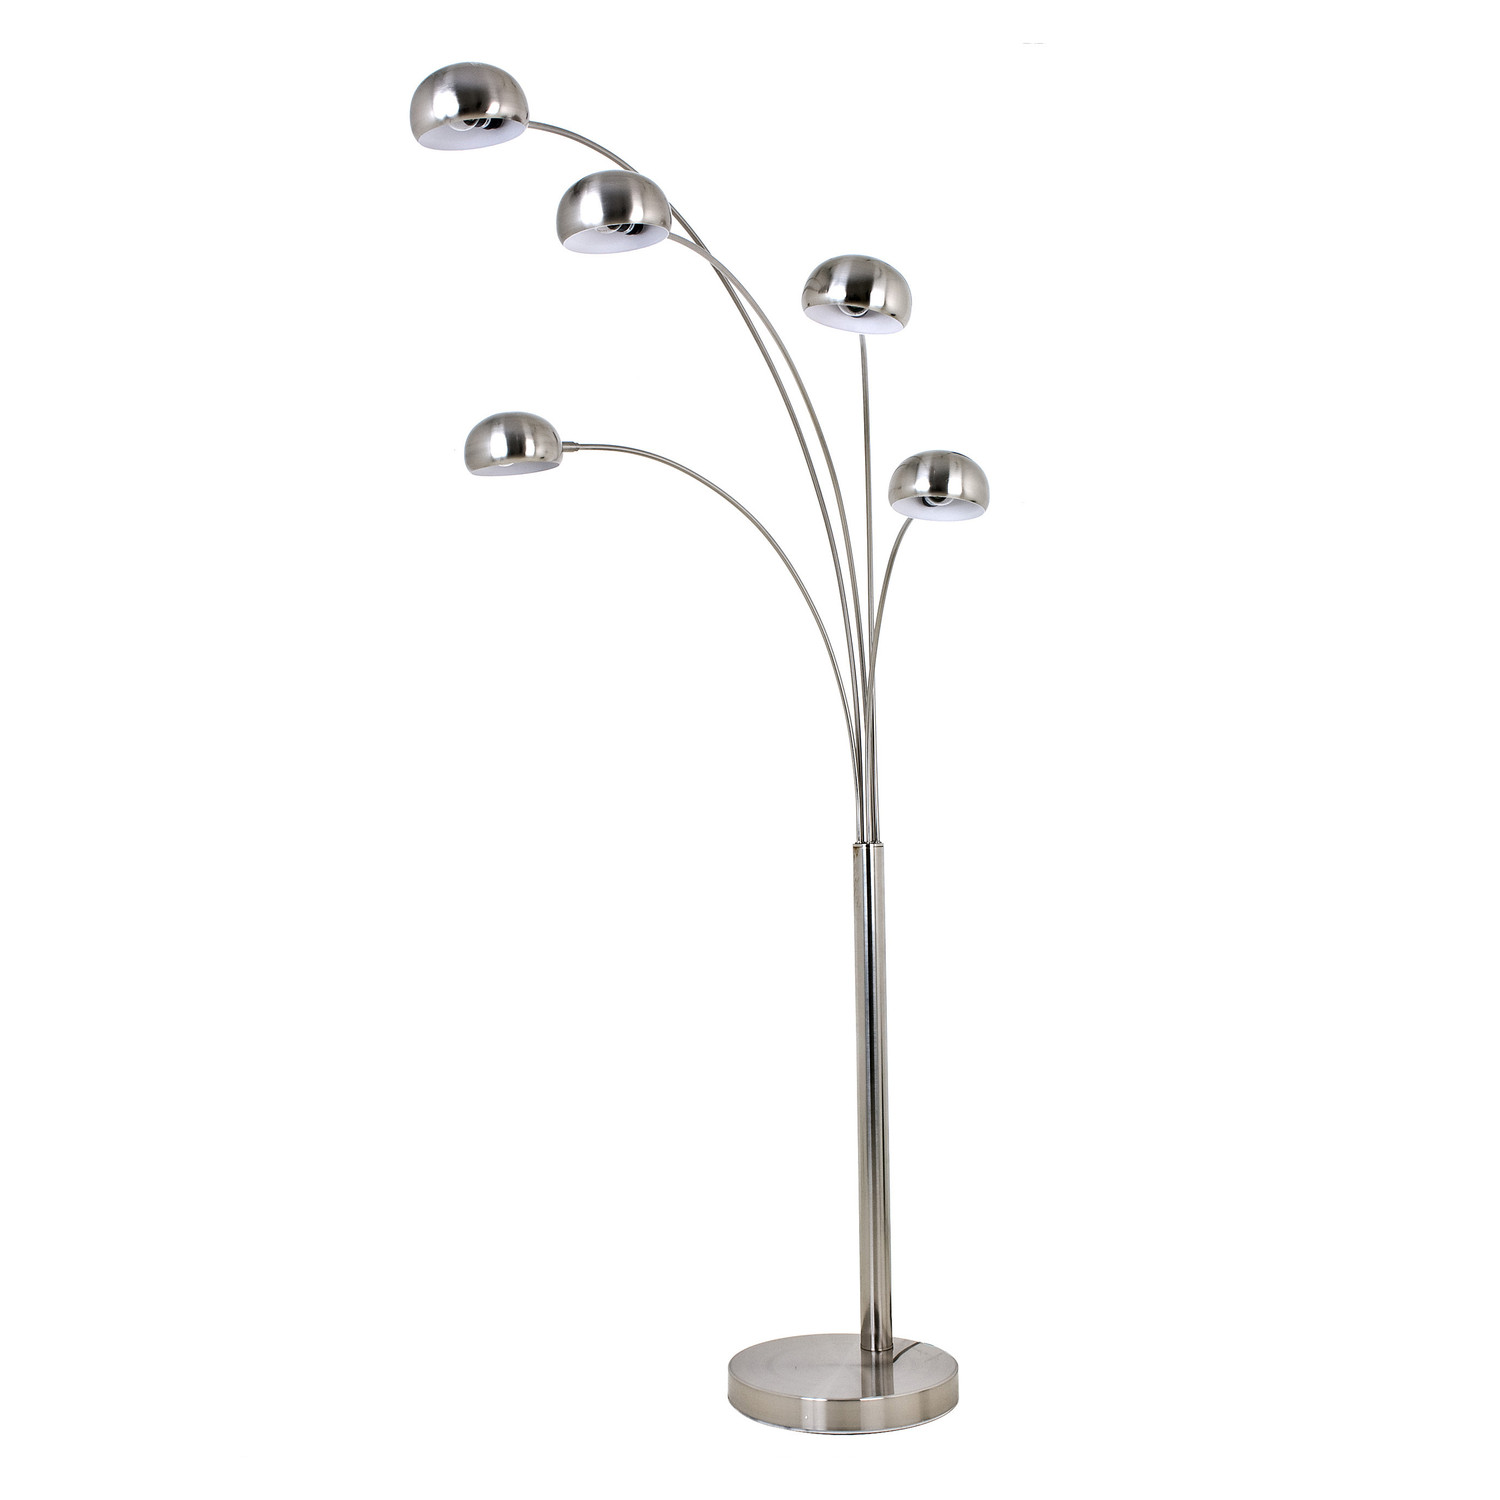 Floor Lamp 5 Arm Bow Chrome with Dimmer - Leitmotiv by Present Time Inc